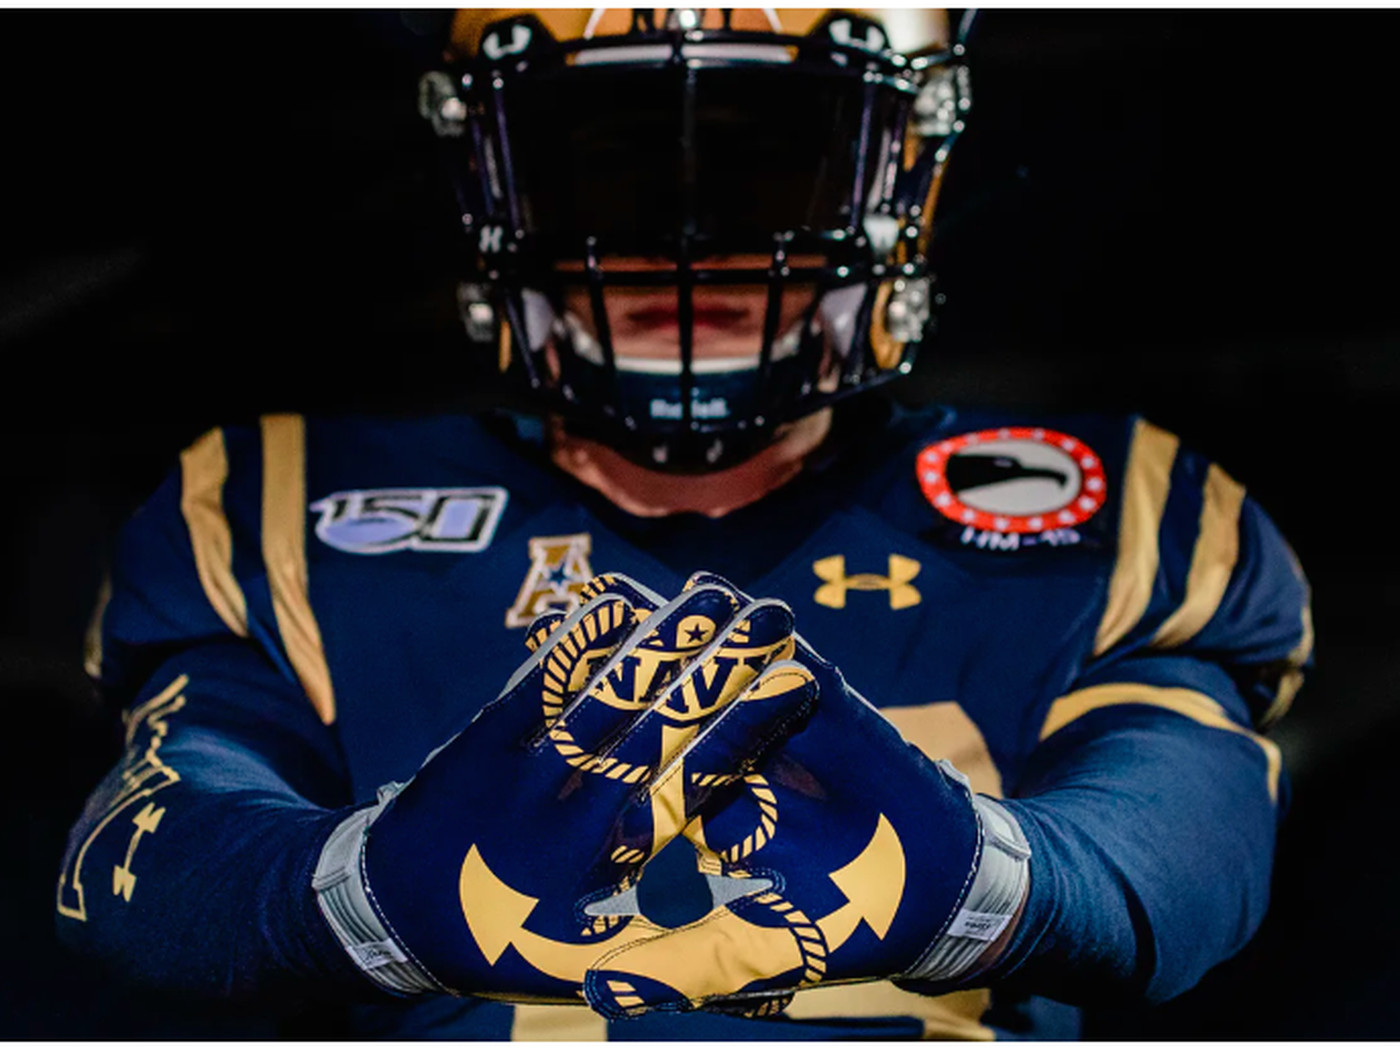 Army Navy Game Uniforms Released For The Navy Midshipmen All Enemies